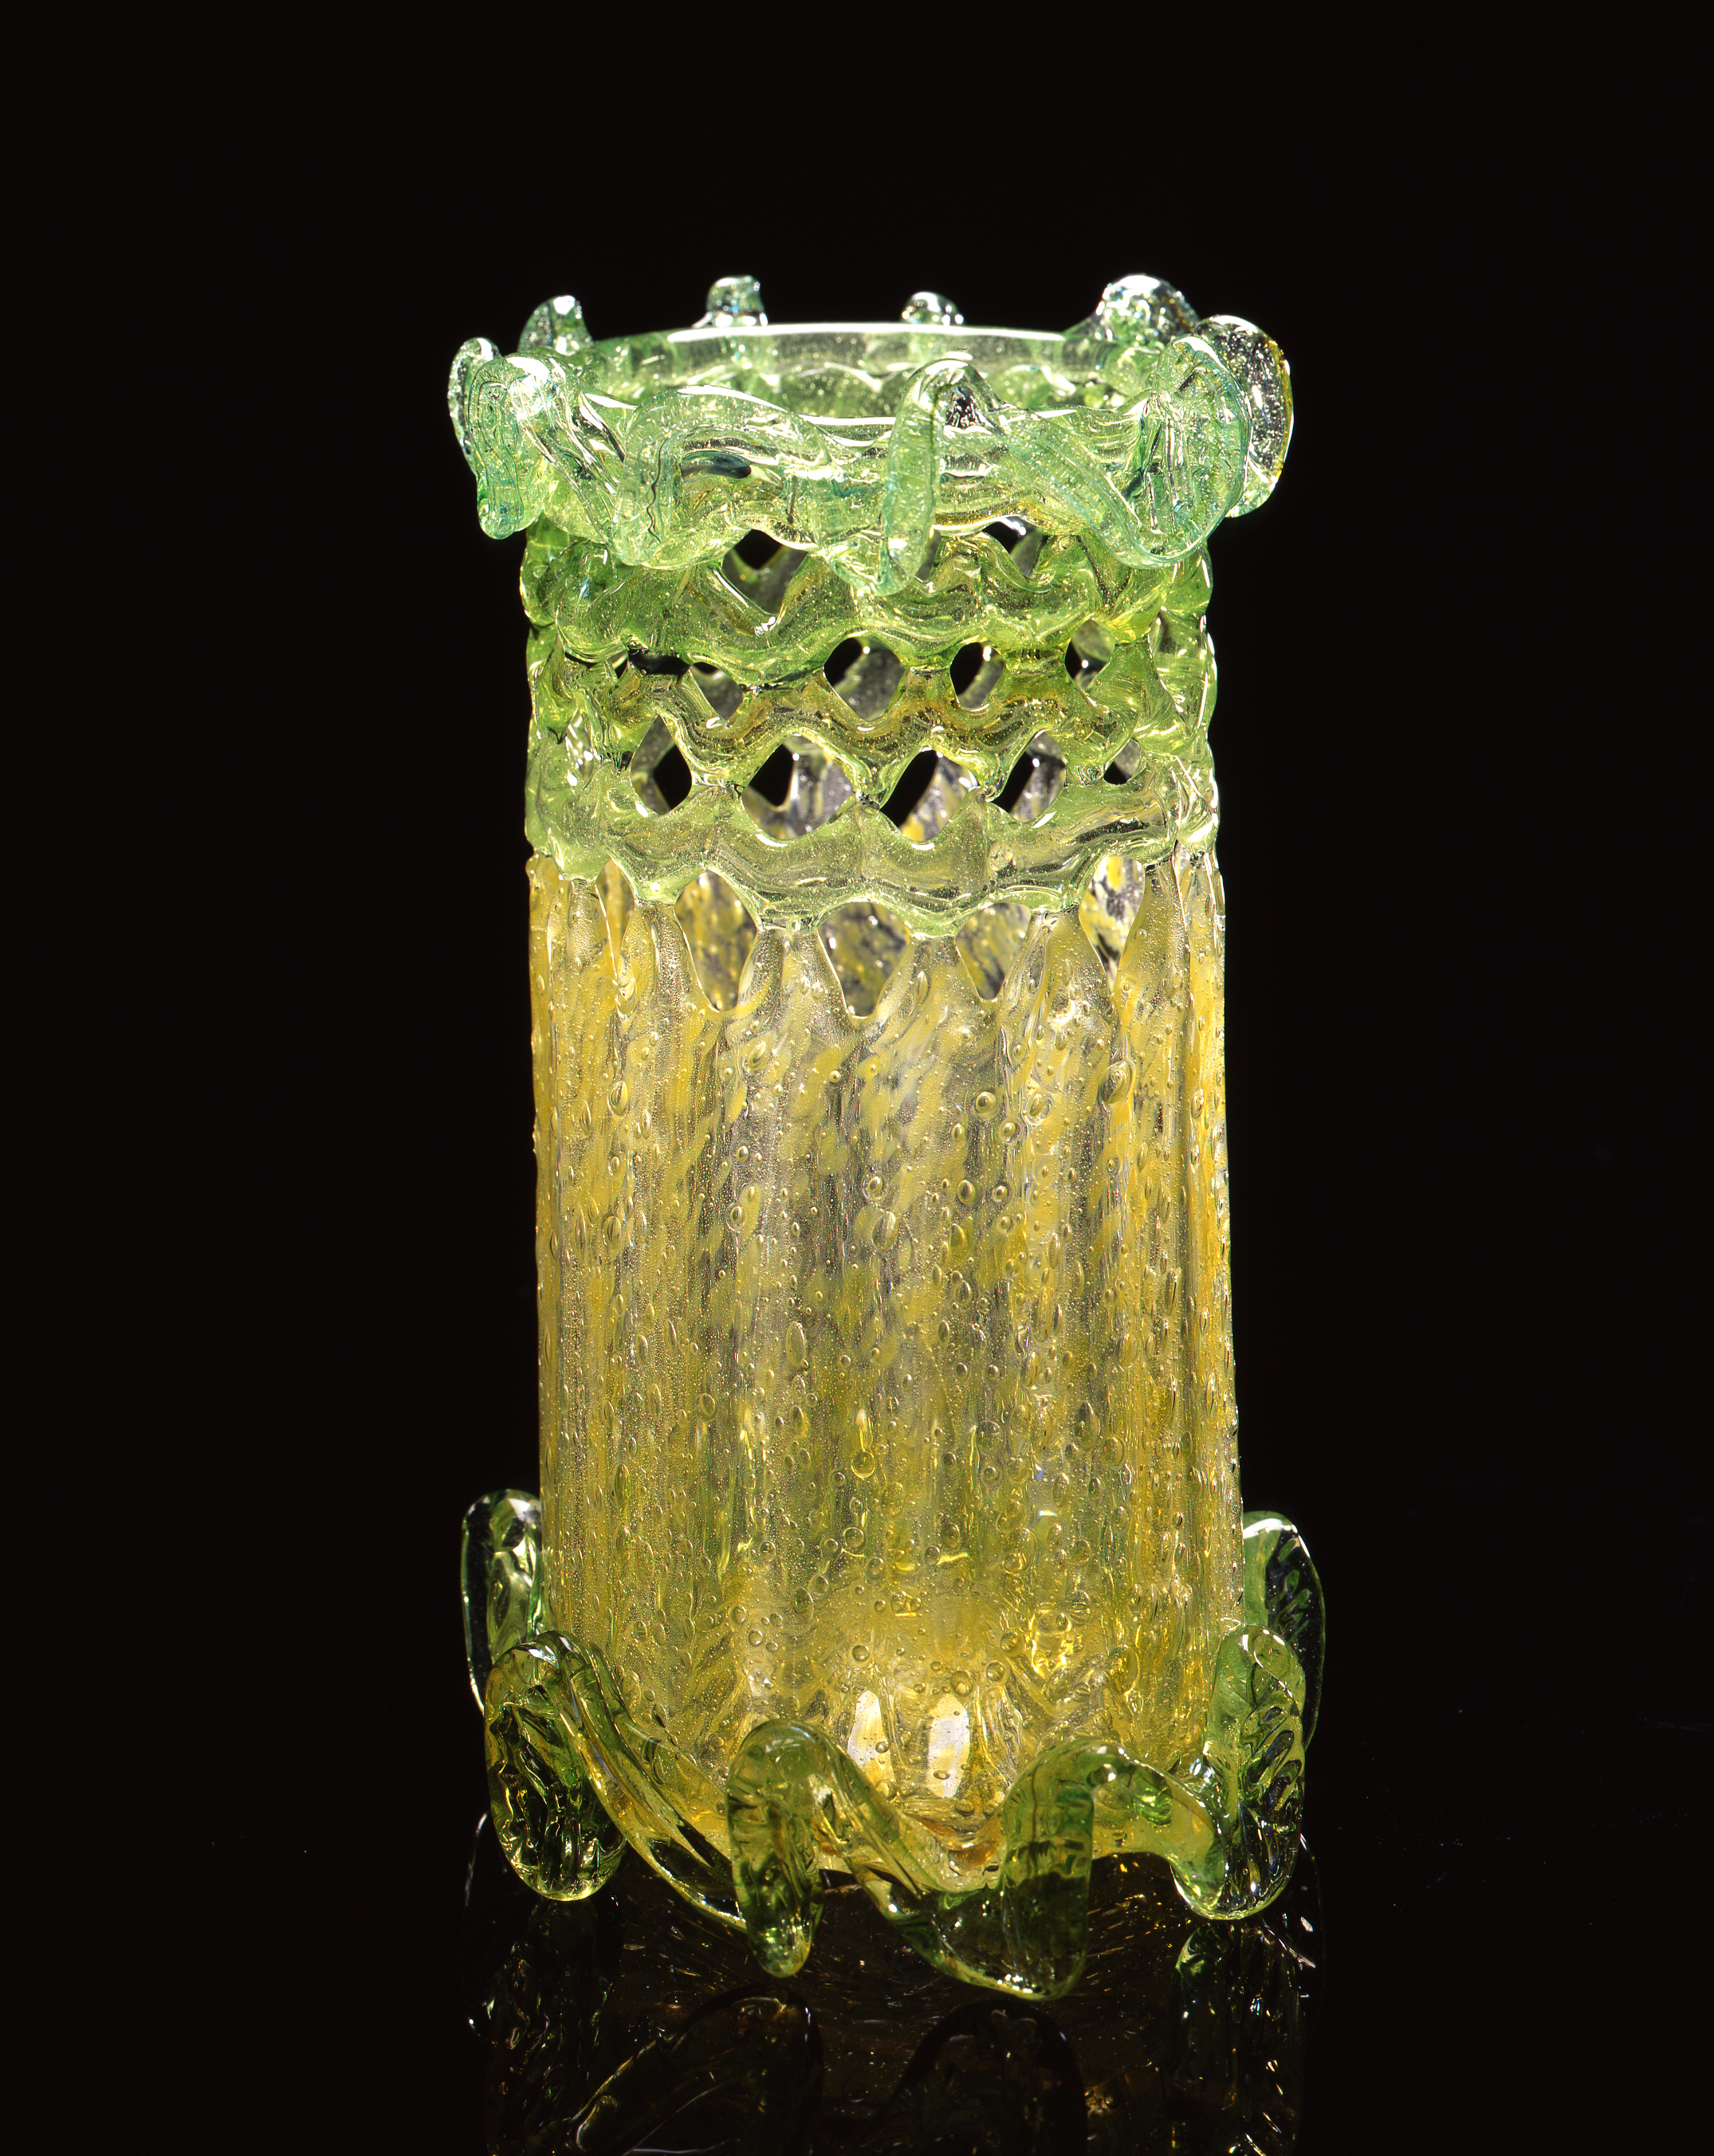  Dale Chihuly,&nbsp; Clear {rim rose Green Piccolo Venetian with Ribbons &nbsp;(1995, glass, 8 x 5 x 5 inches) 